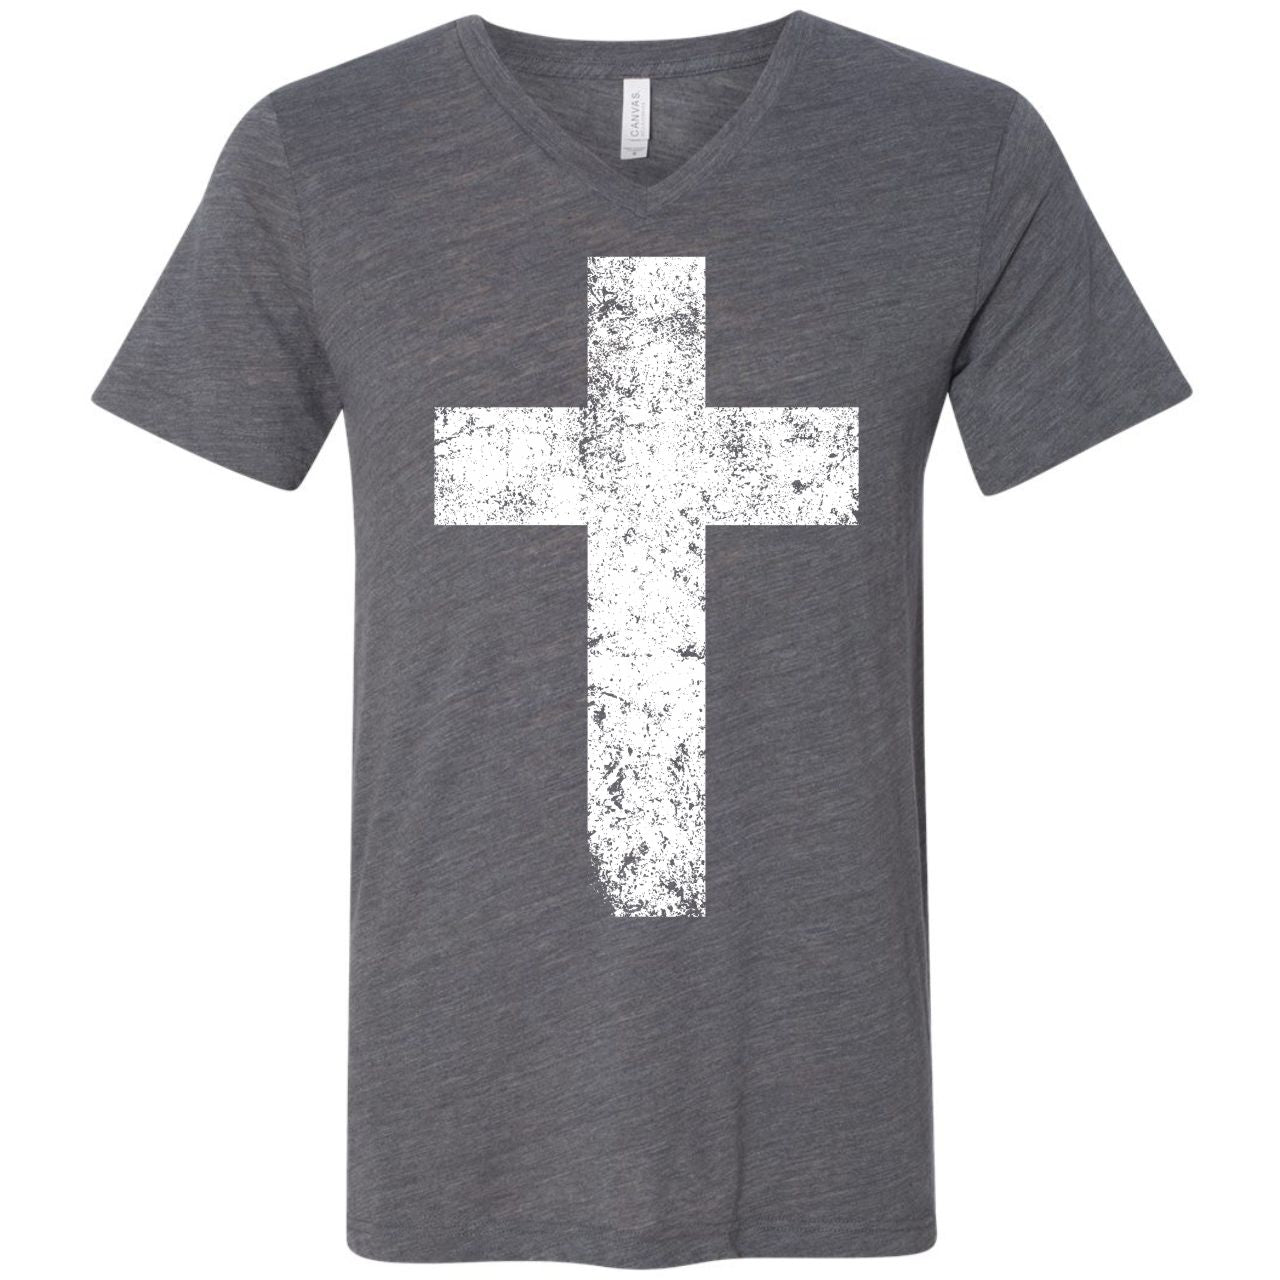 Cross - Unisex V-Neck Tee with White Print - The Graphic Tee